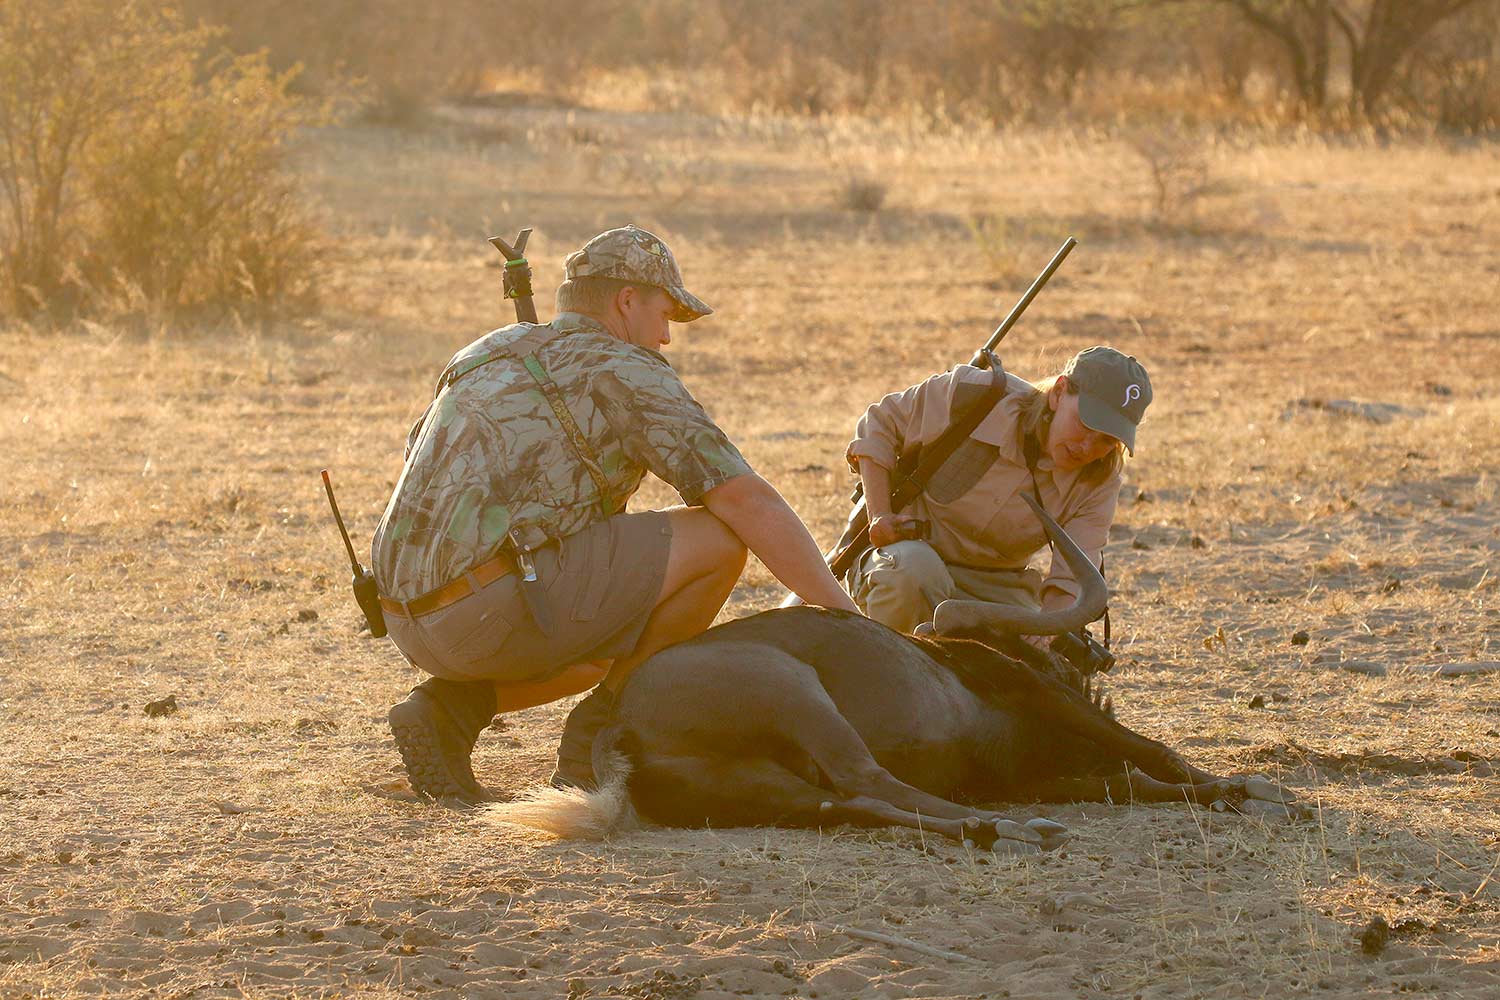 Two hunters hunting wildebeest during an Africa safari hunt.